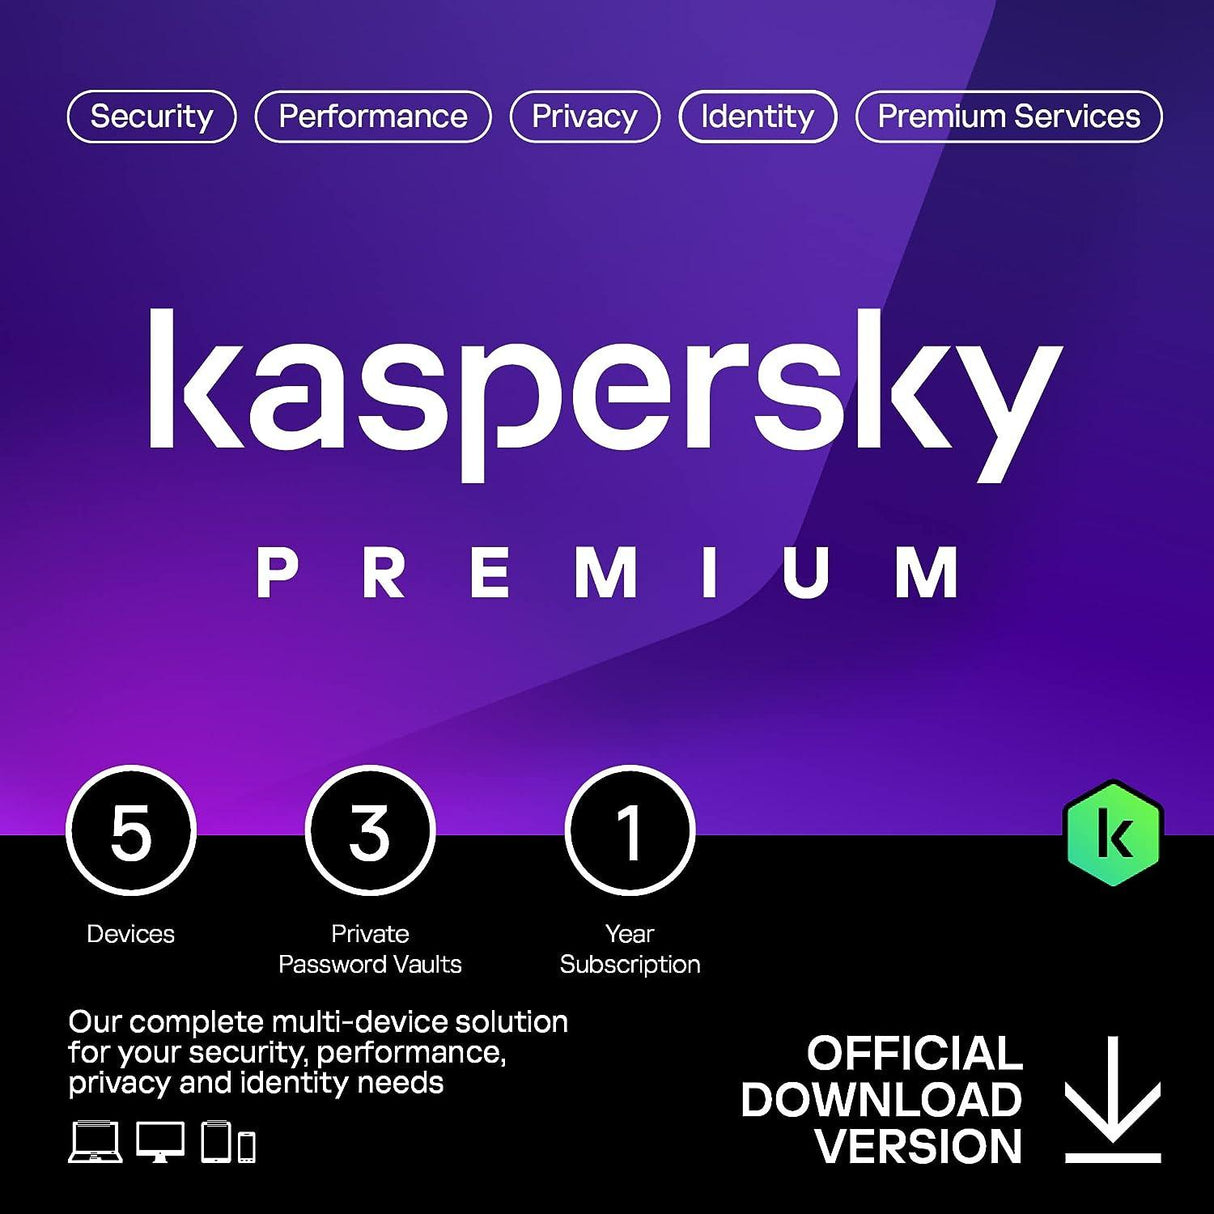 Kaspersky Premium 2023 - Instant Download for Windows and Mac (5 Computers) - SoftwareCW - Authorized Reseller